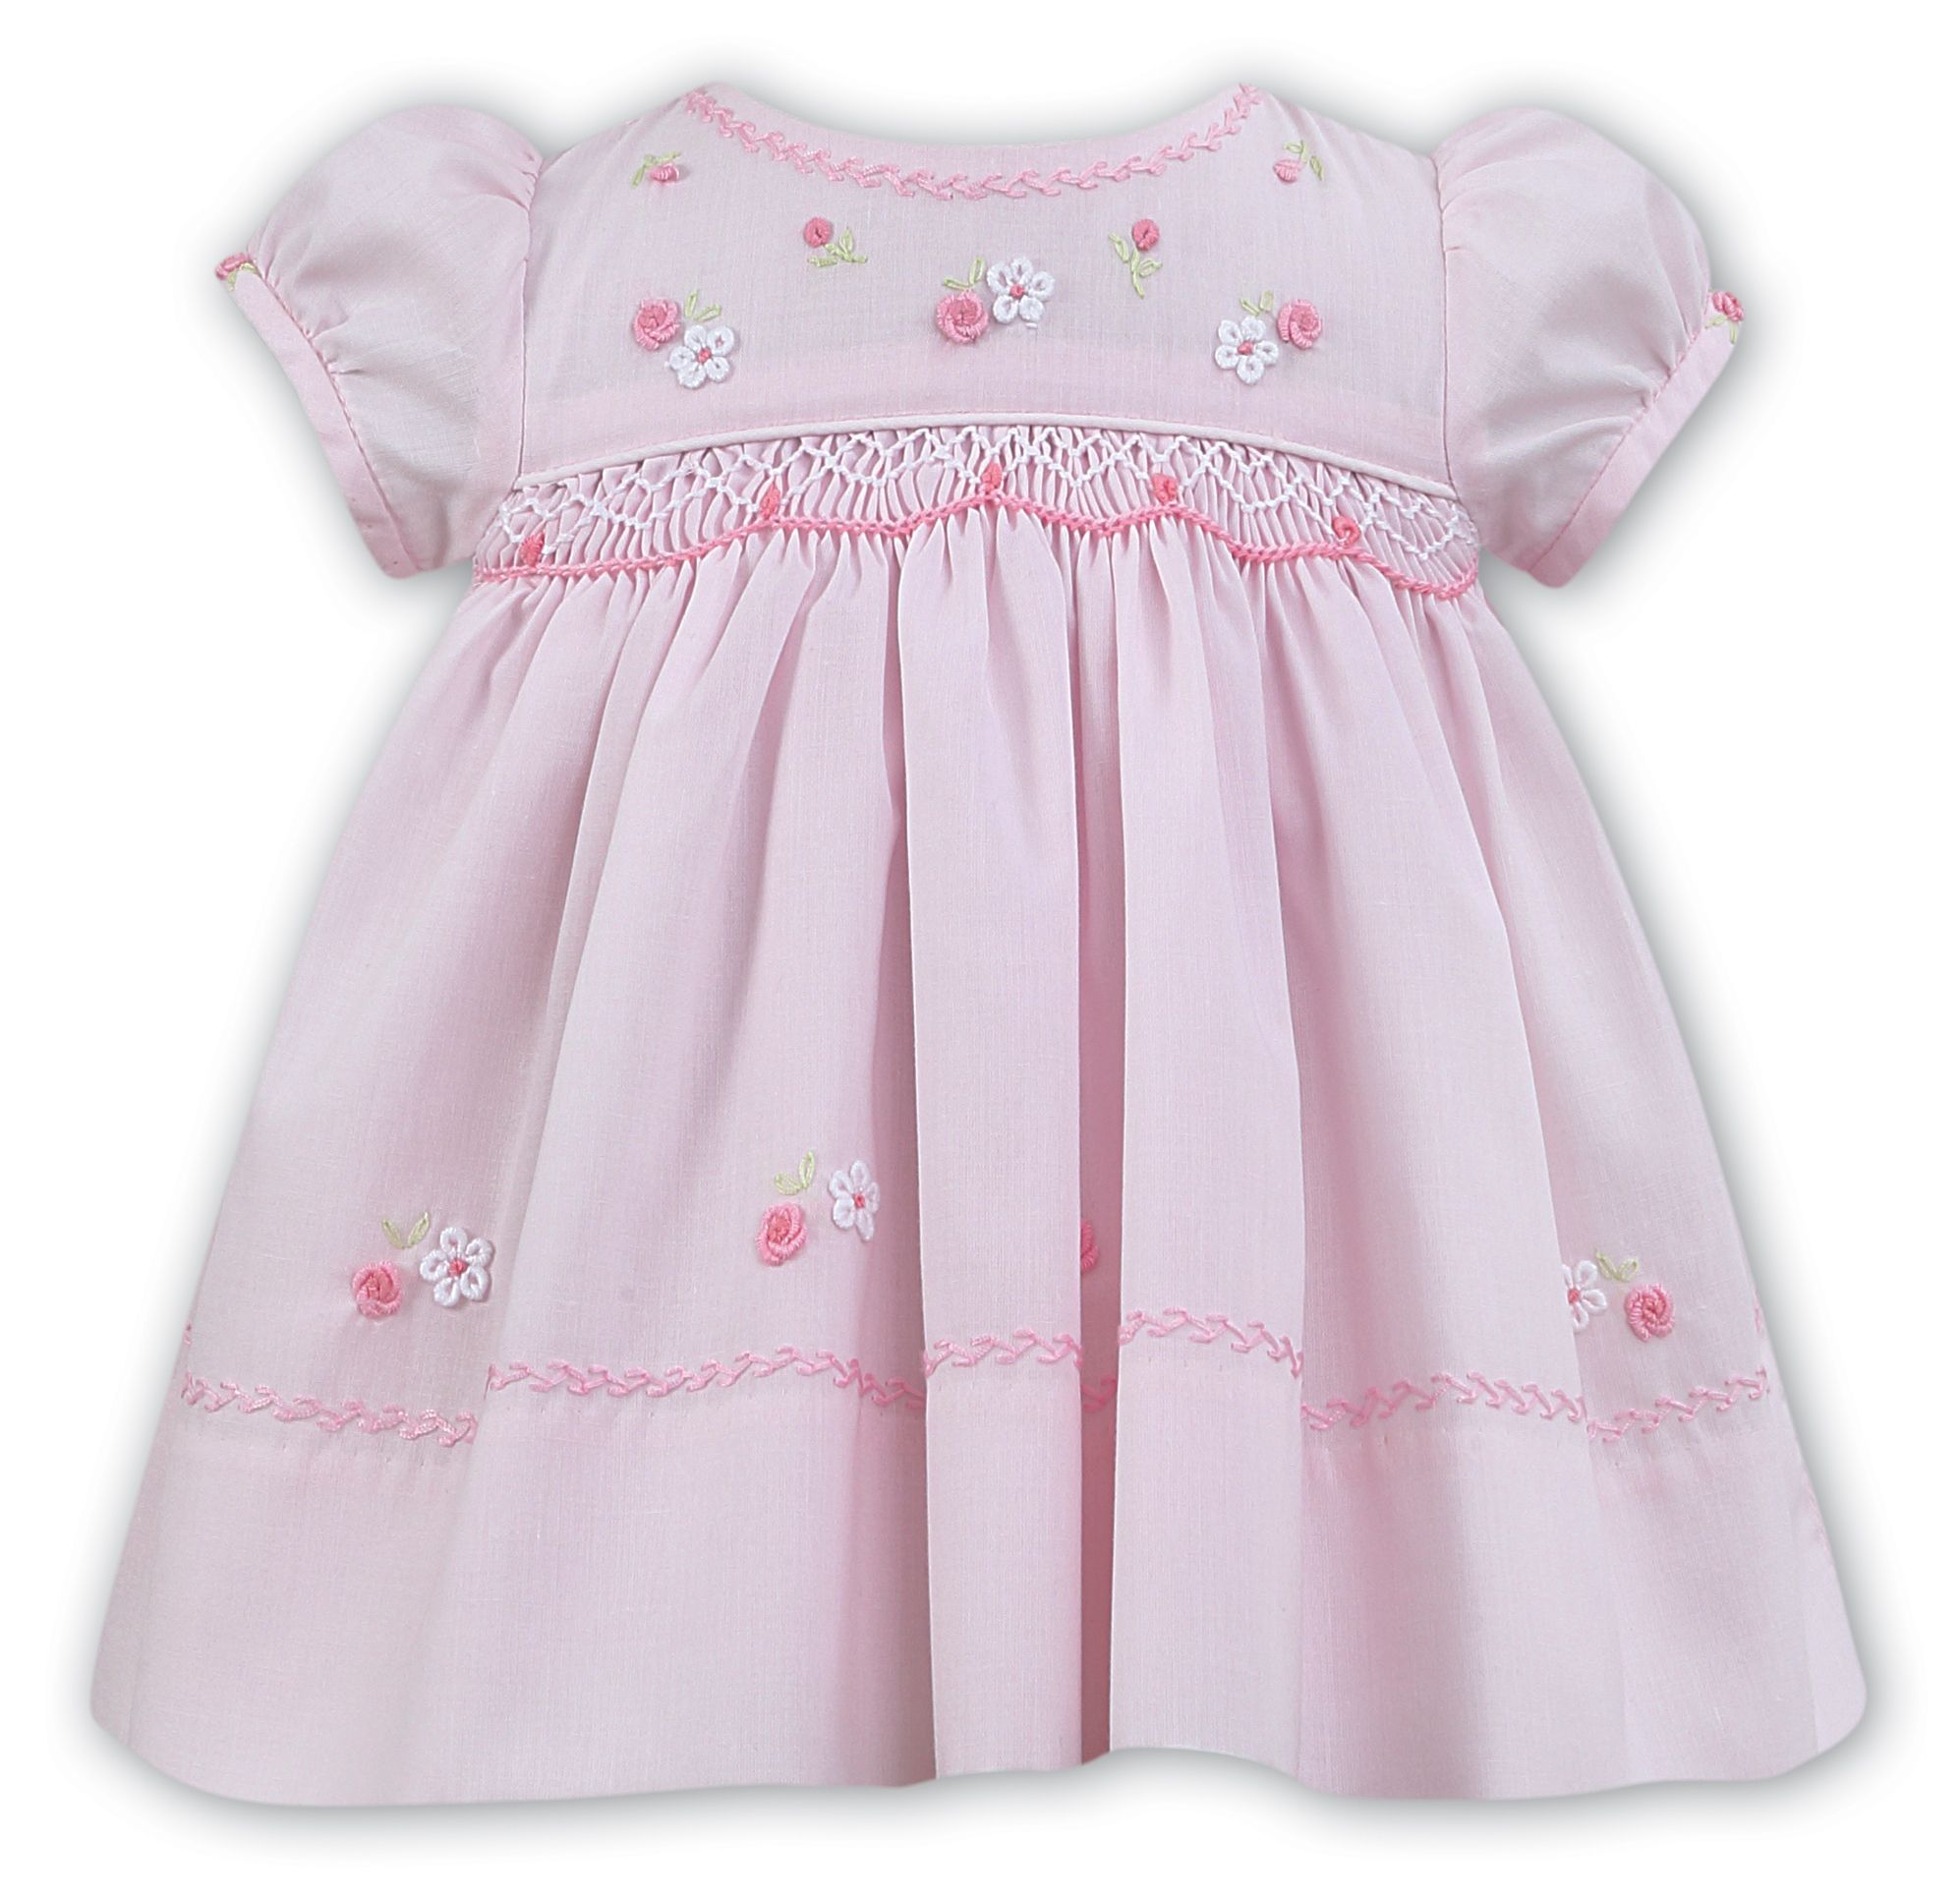 fashionista baby girl clothes